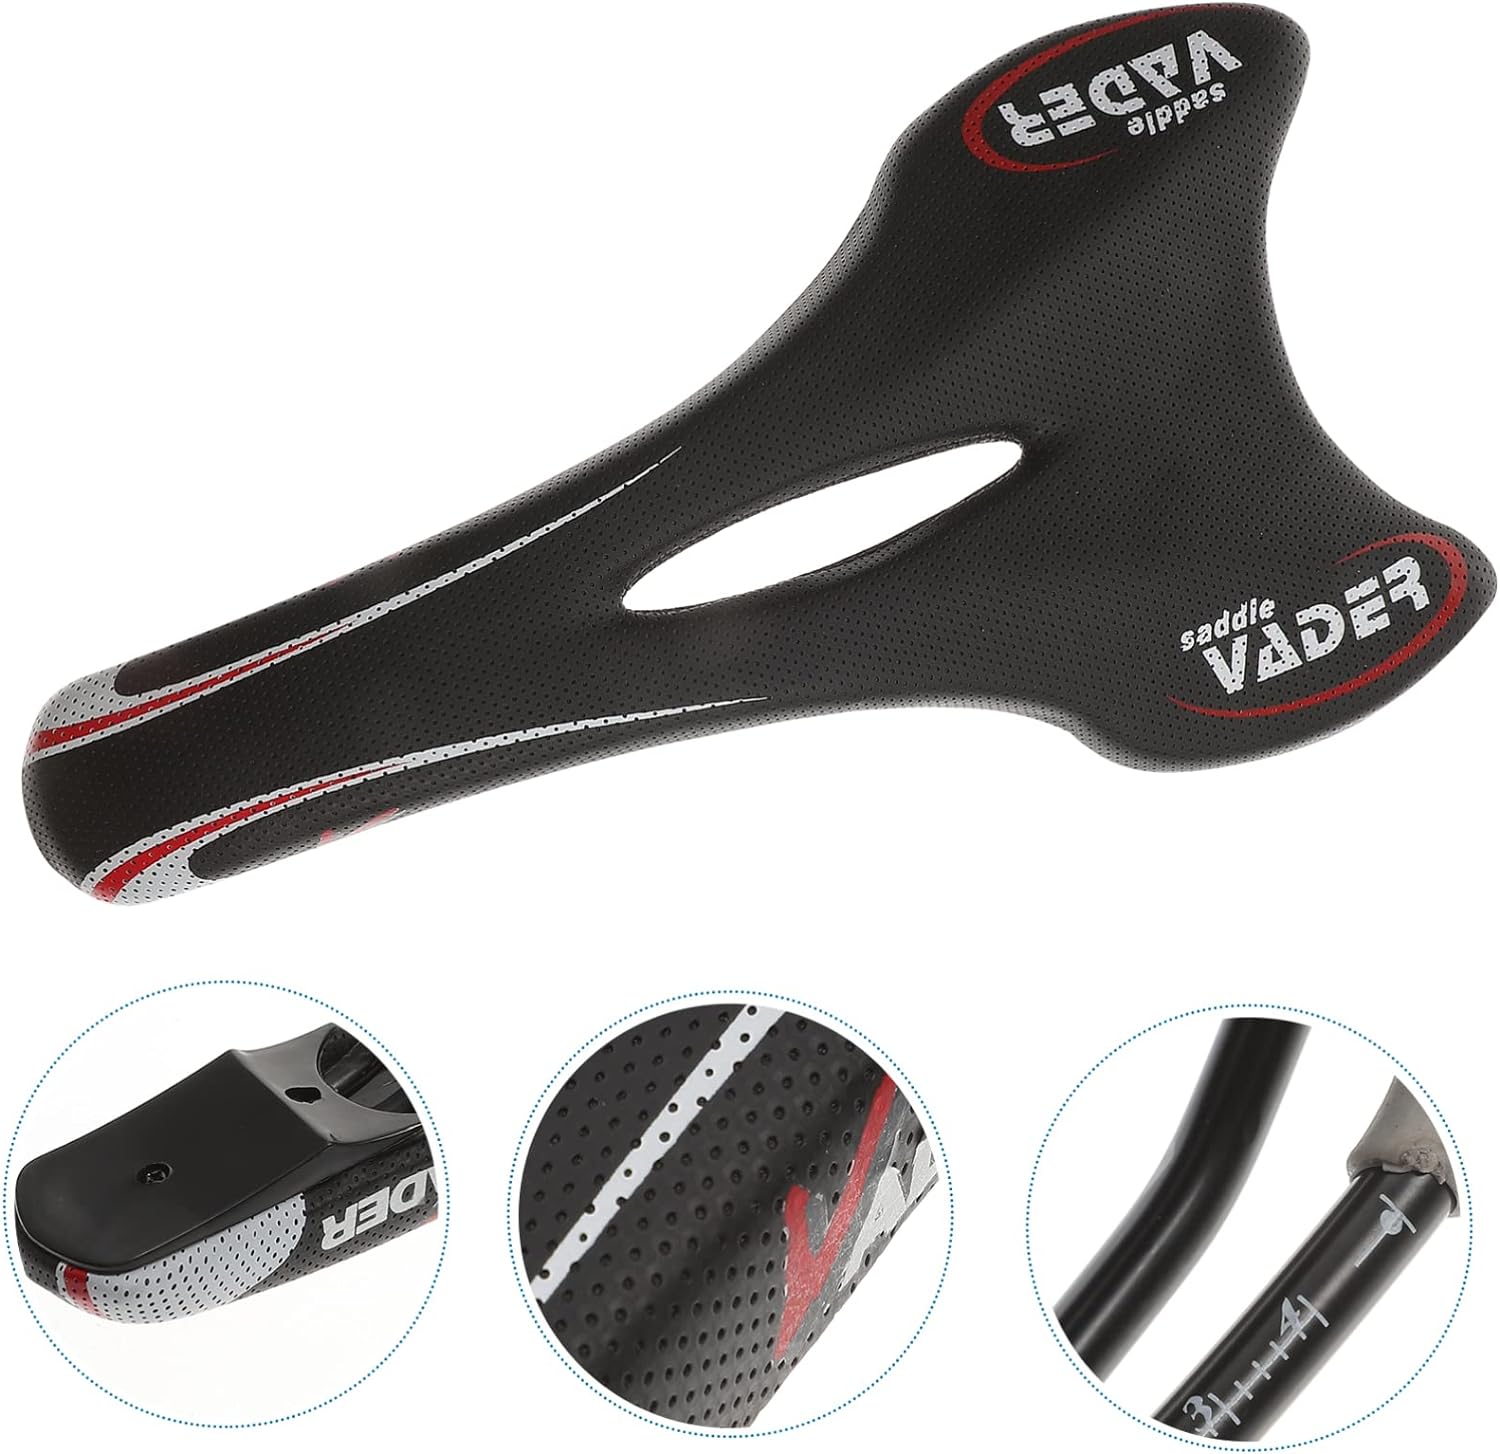 Reviewing and Comparing 5 Offroad Cycling Products